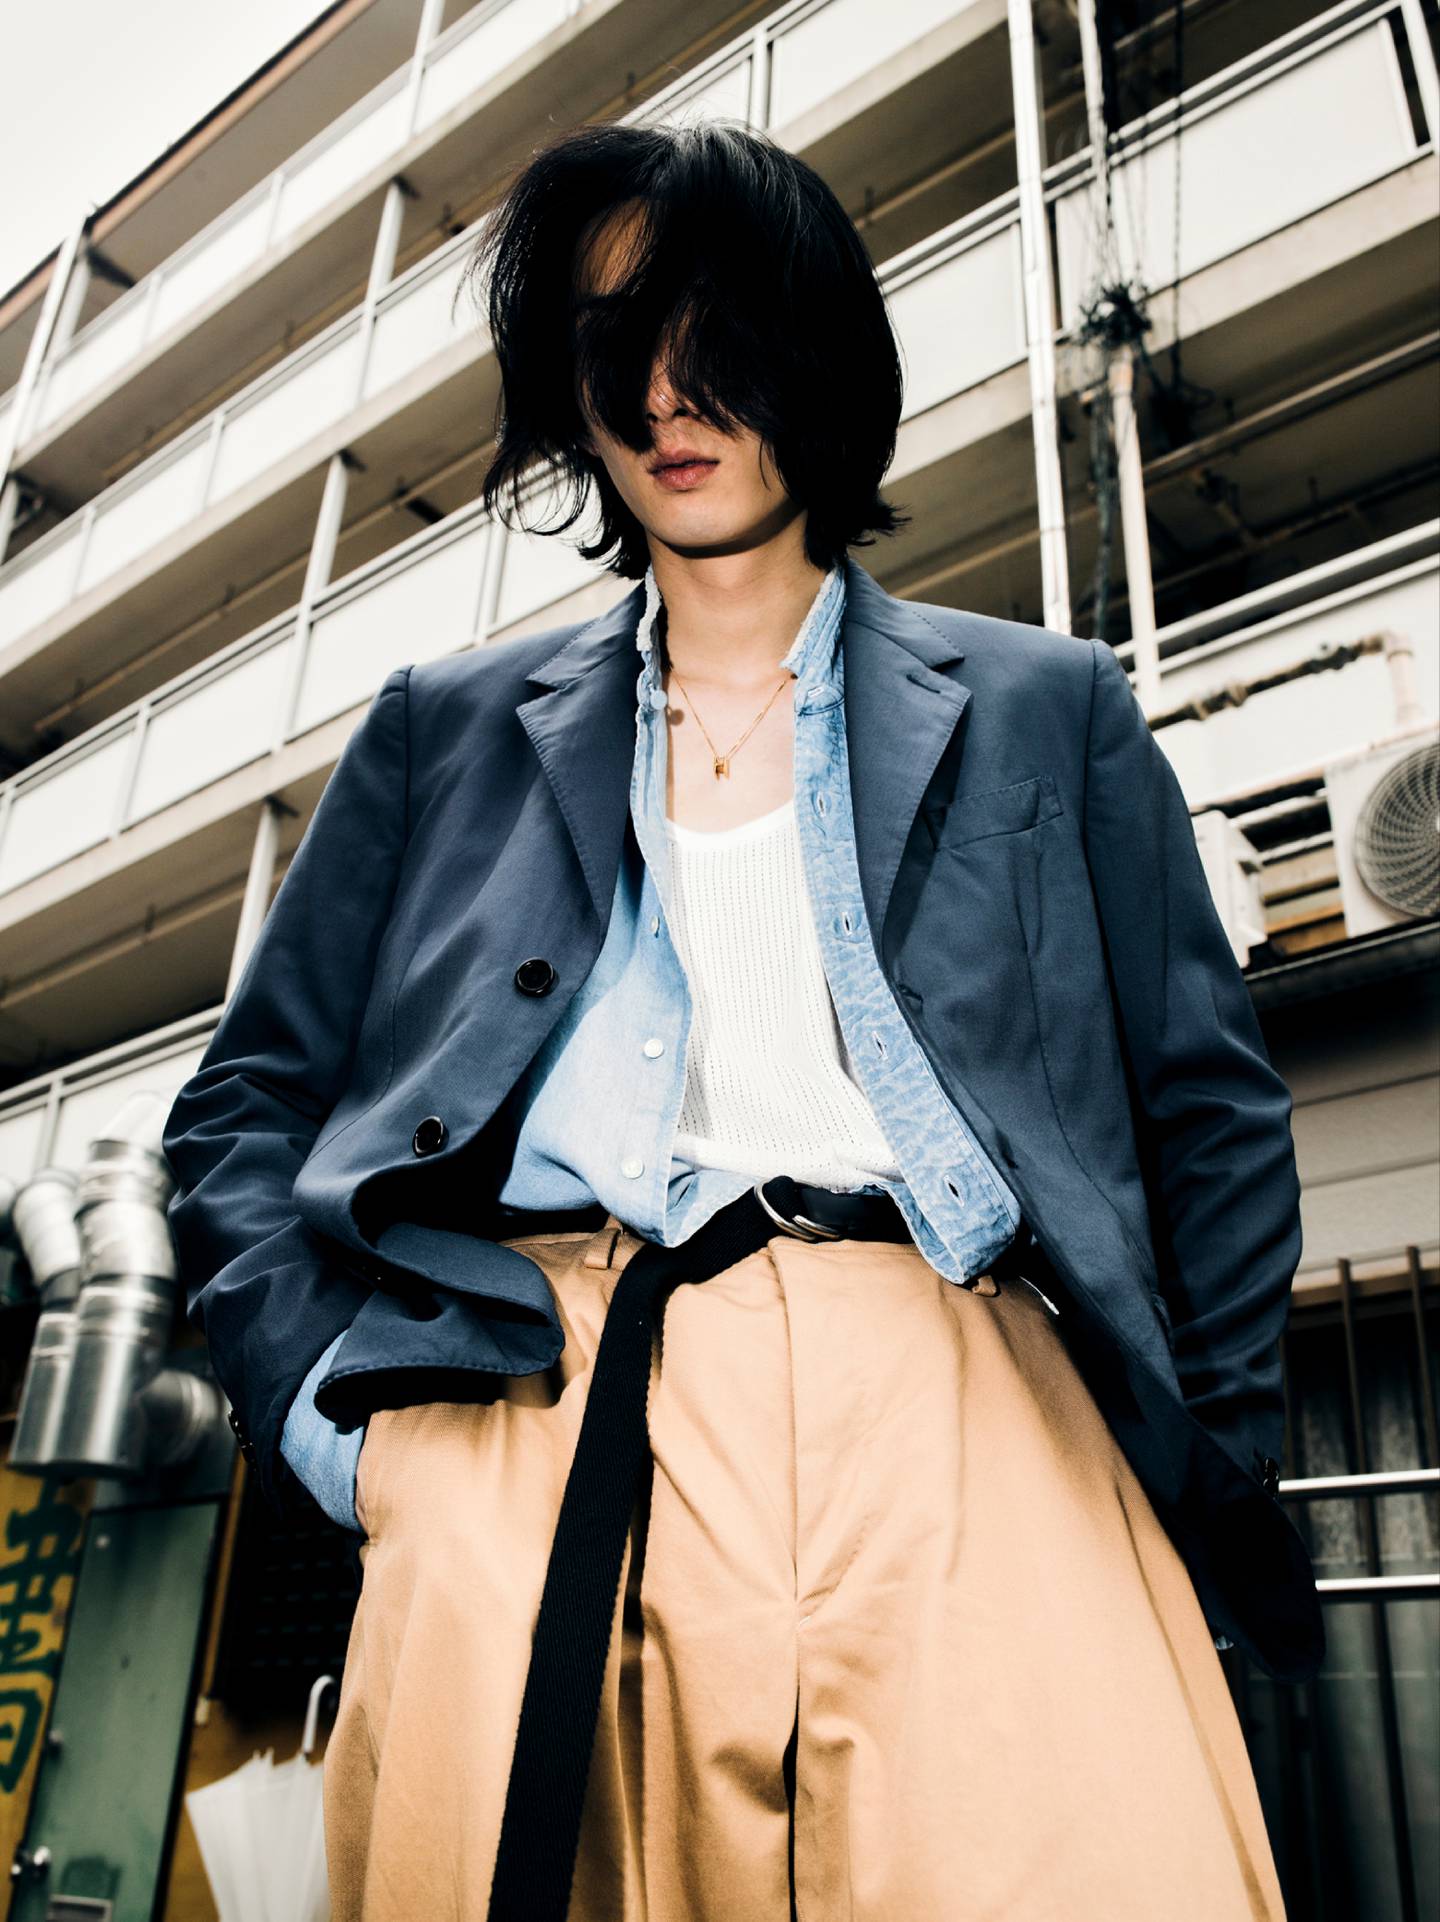 AMC's second collection, shot on the streets of Tokyo. The brand is run by former Valentino designer Aldo Maria Camillo and United Arrows co-founder Hirofumi Kurino.